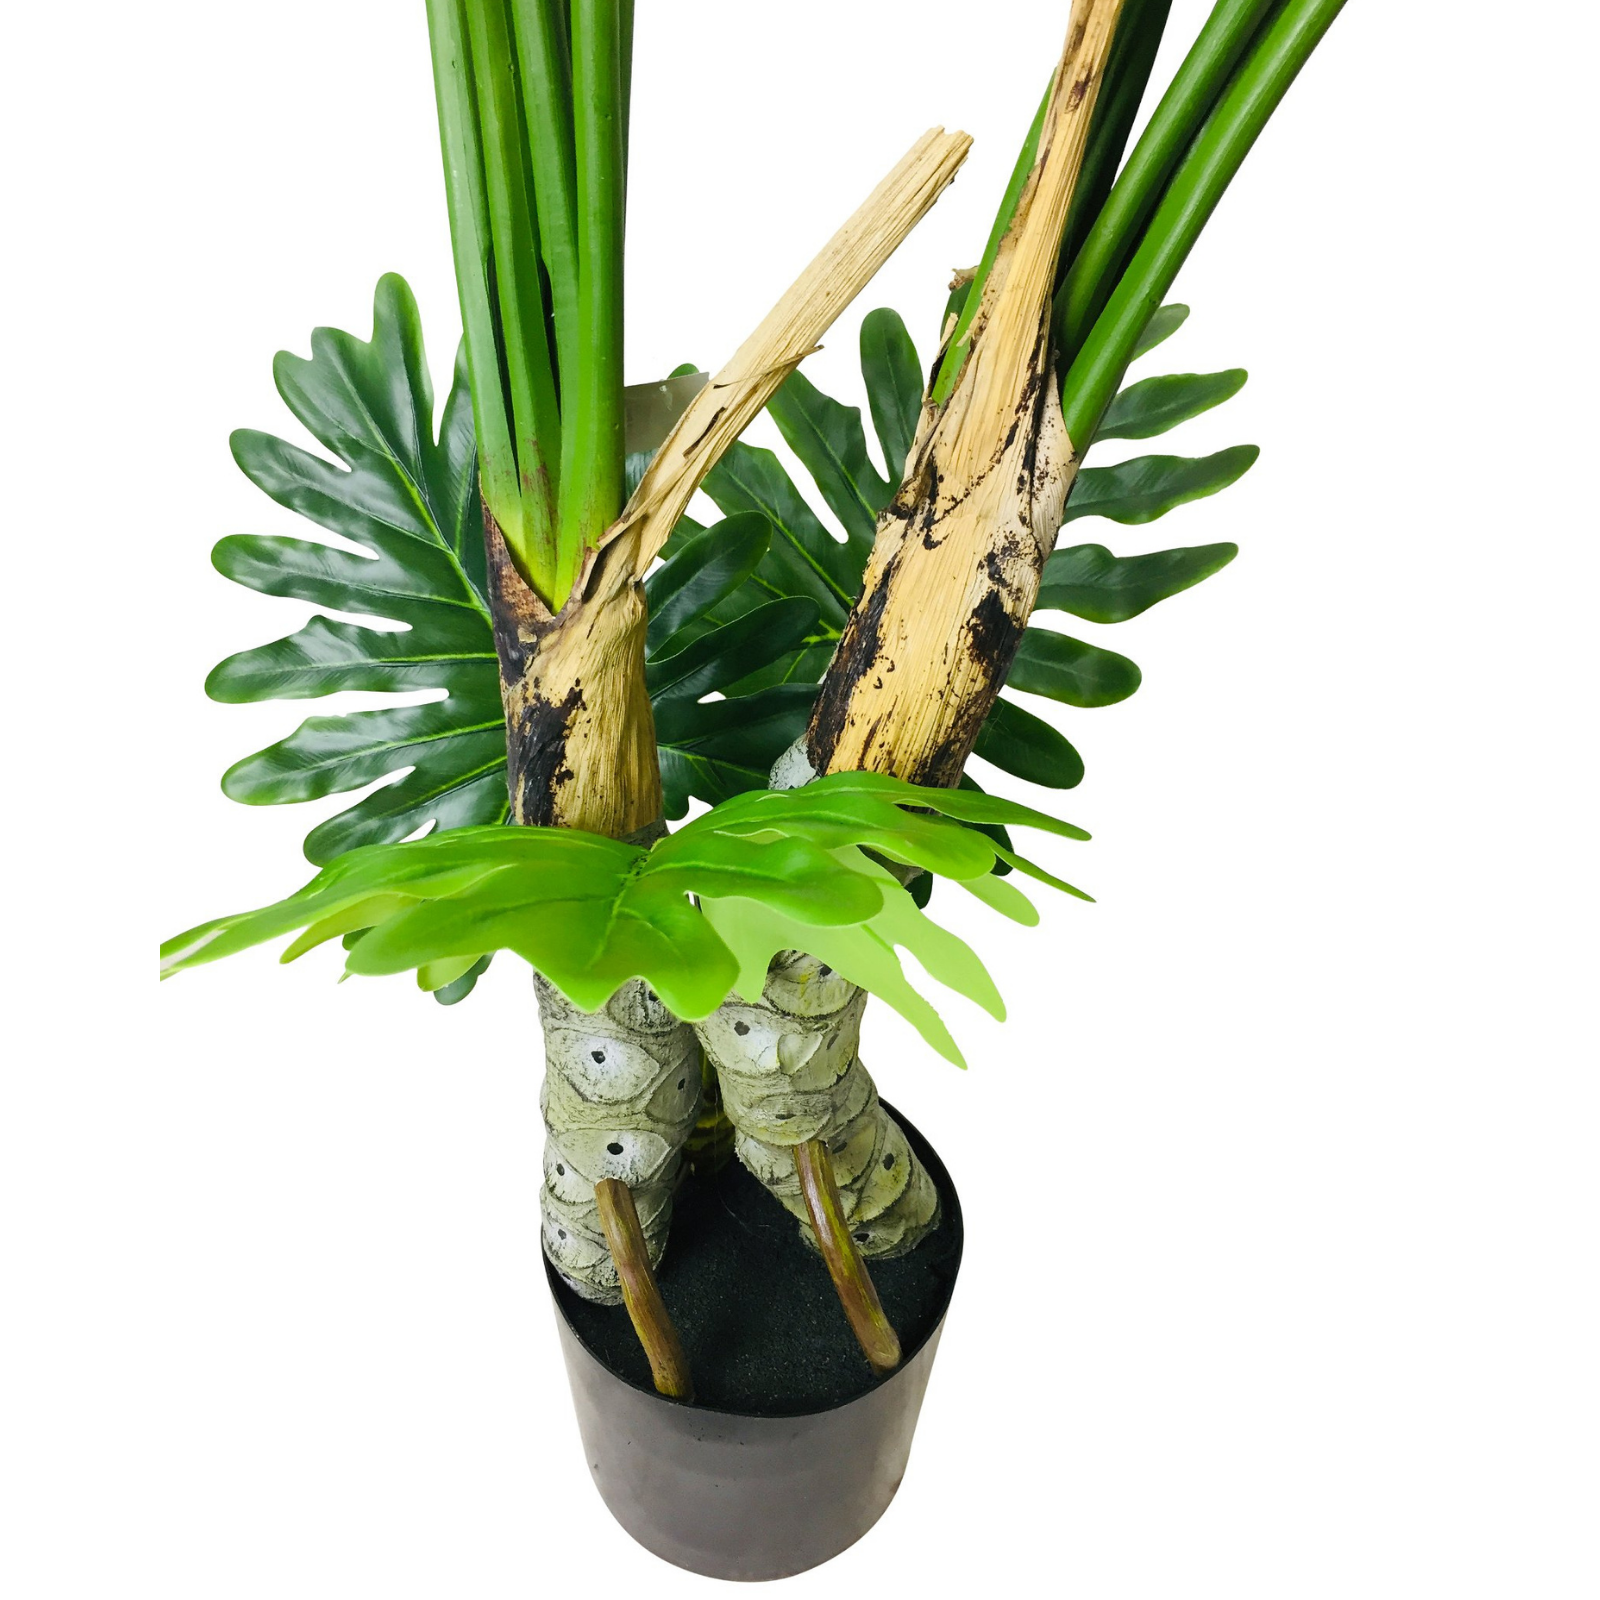 Artificial Philodendron Tree, Spot Stems 135cm